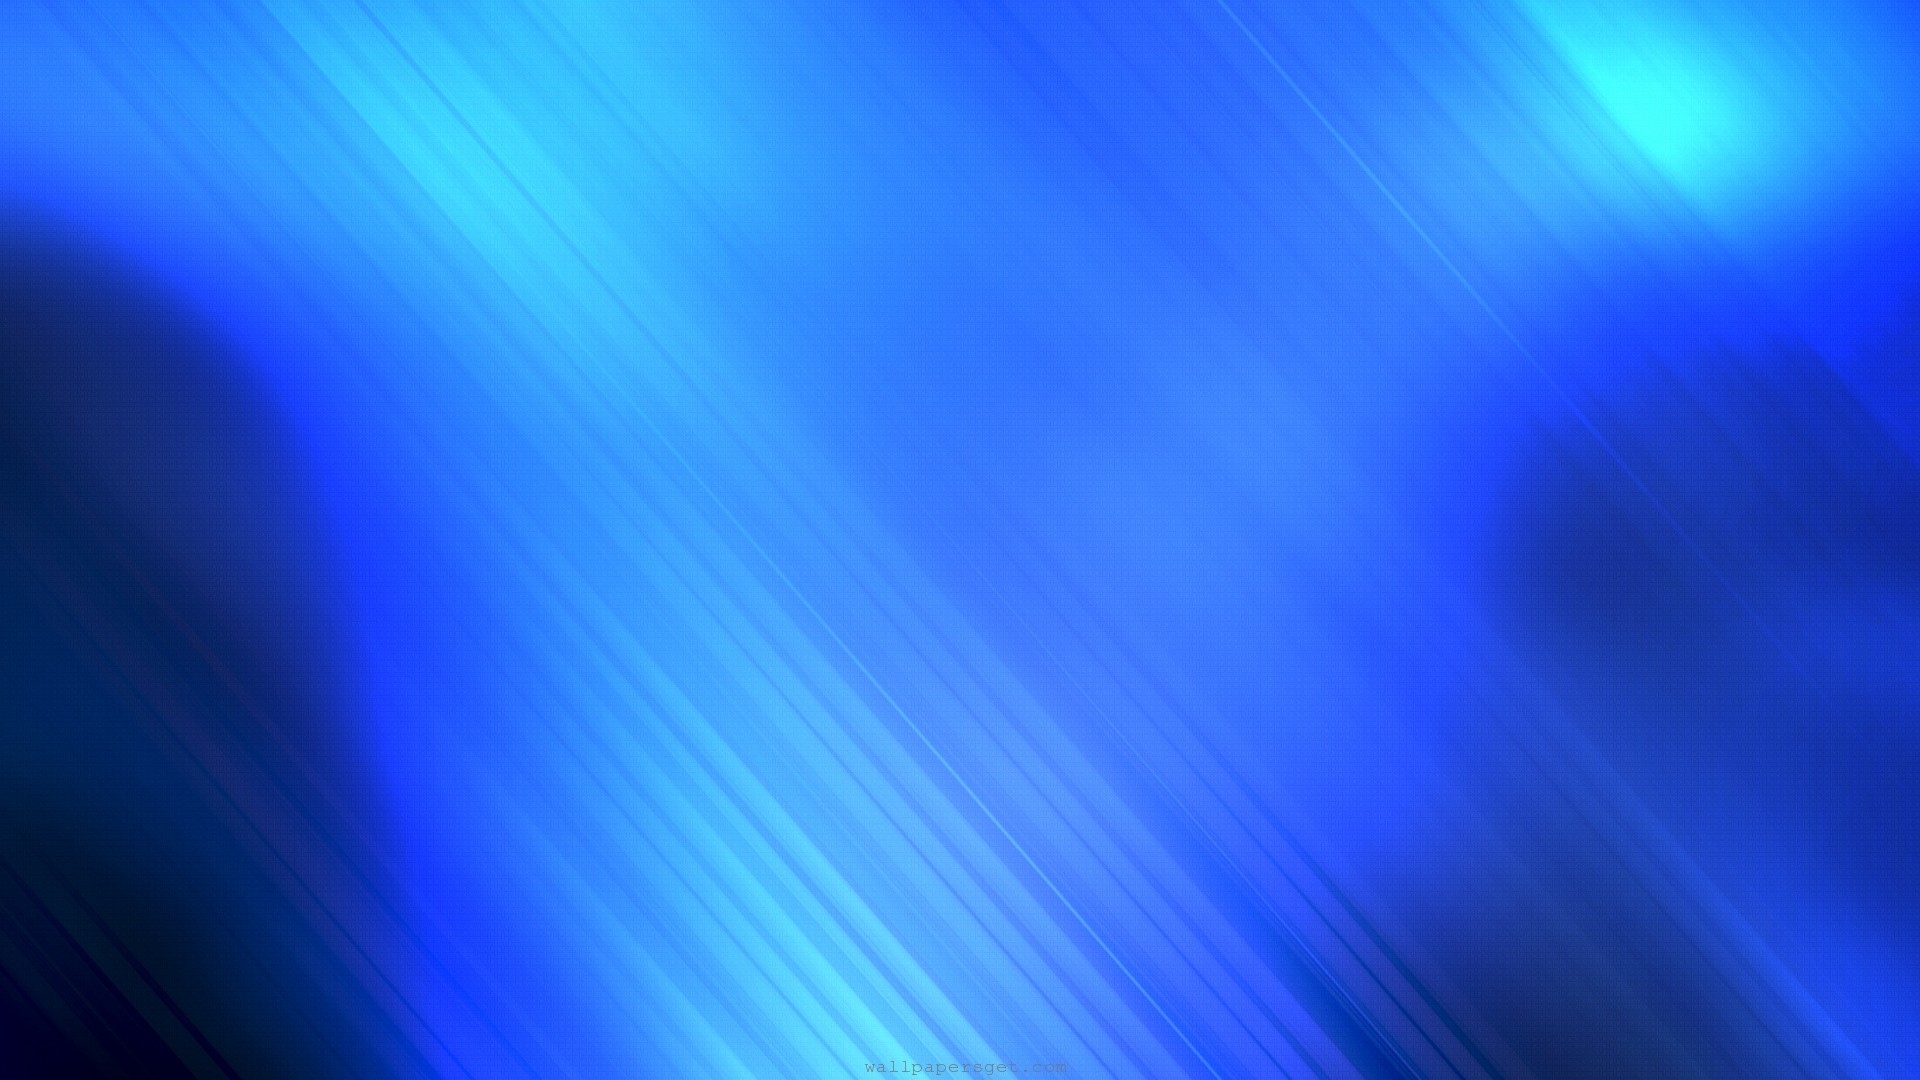 1920x1080 Blue Abstract - See more similiar images at backgroundimages.biz |  Background Images | Pinterest | Background images